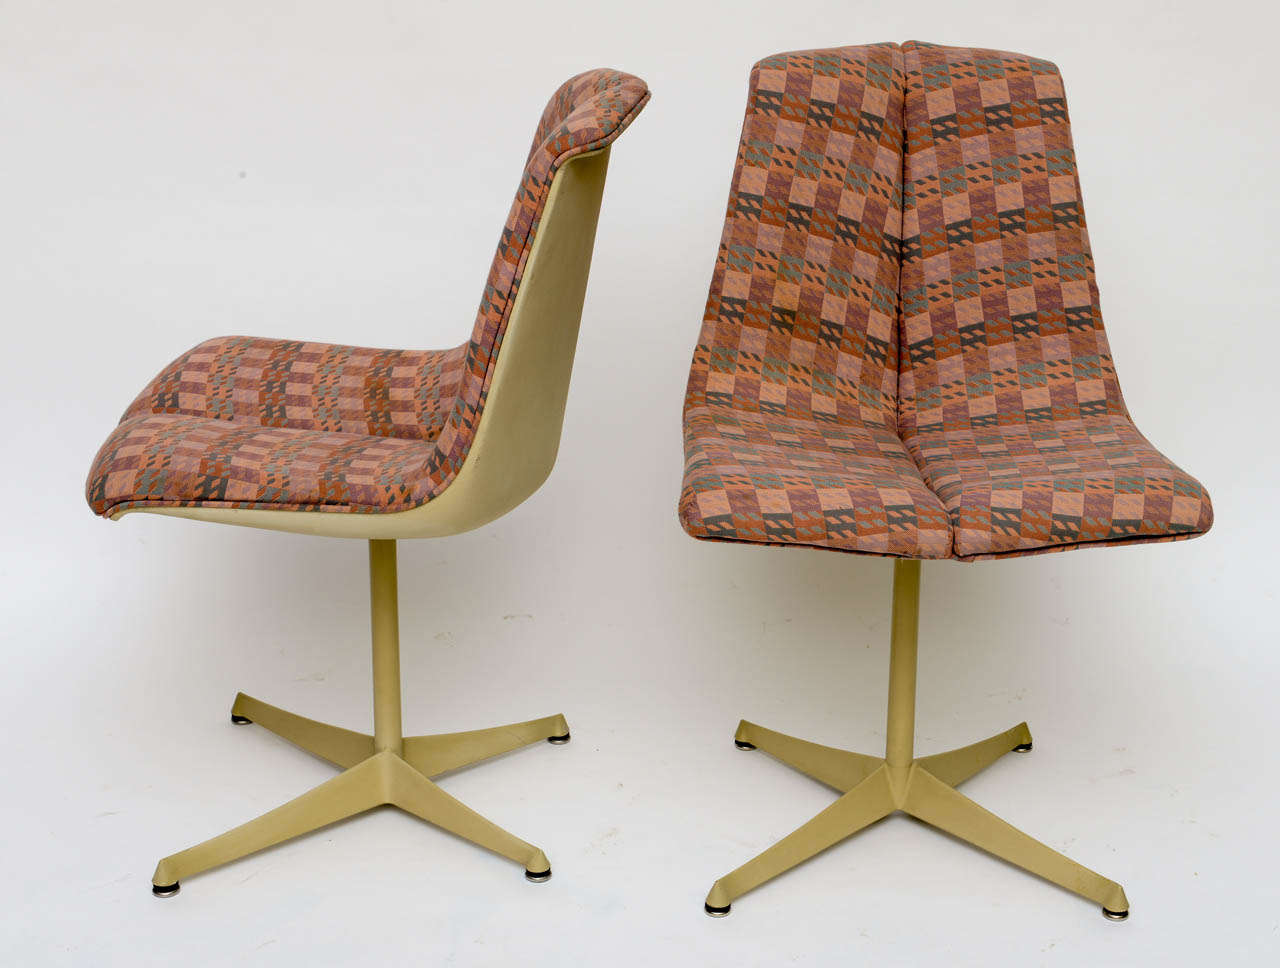 SOLD  This pair of mid century modern chairs by Richard Schultz have a decidedly space age modern flair with their star bases and sculpted shapes.  Produced for Knoll, they were part of the Metal Arts Series of the 1960s.  Both with Knoll Associates